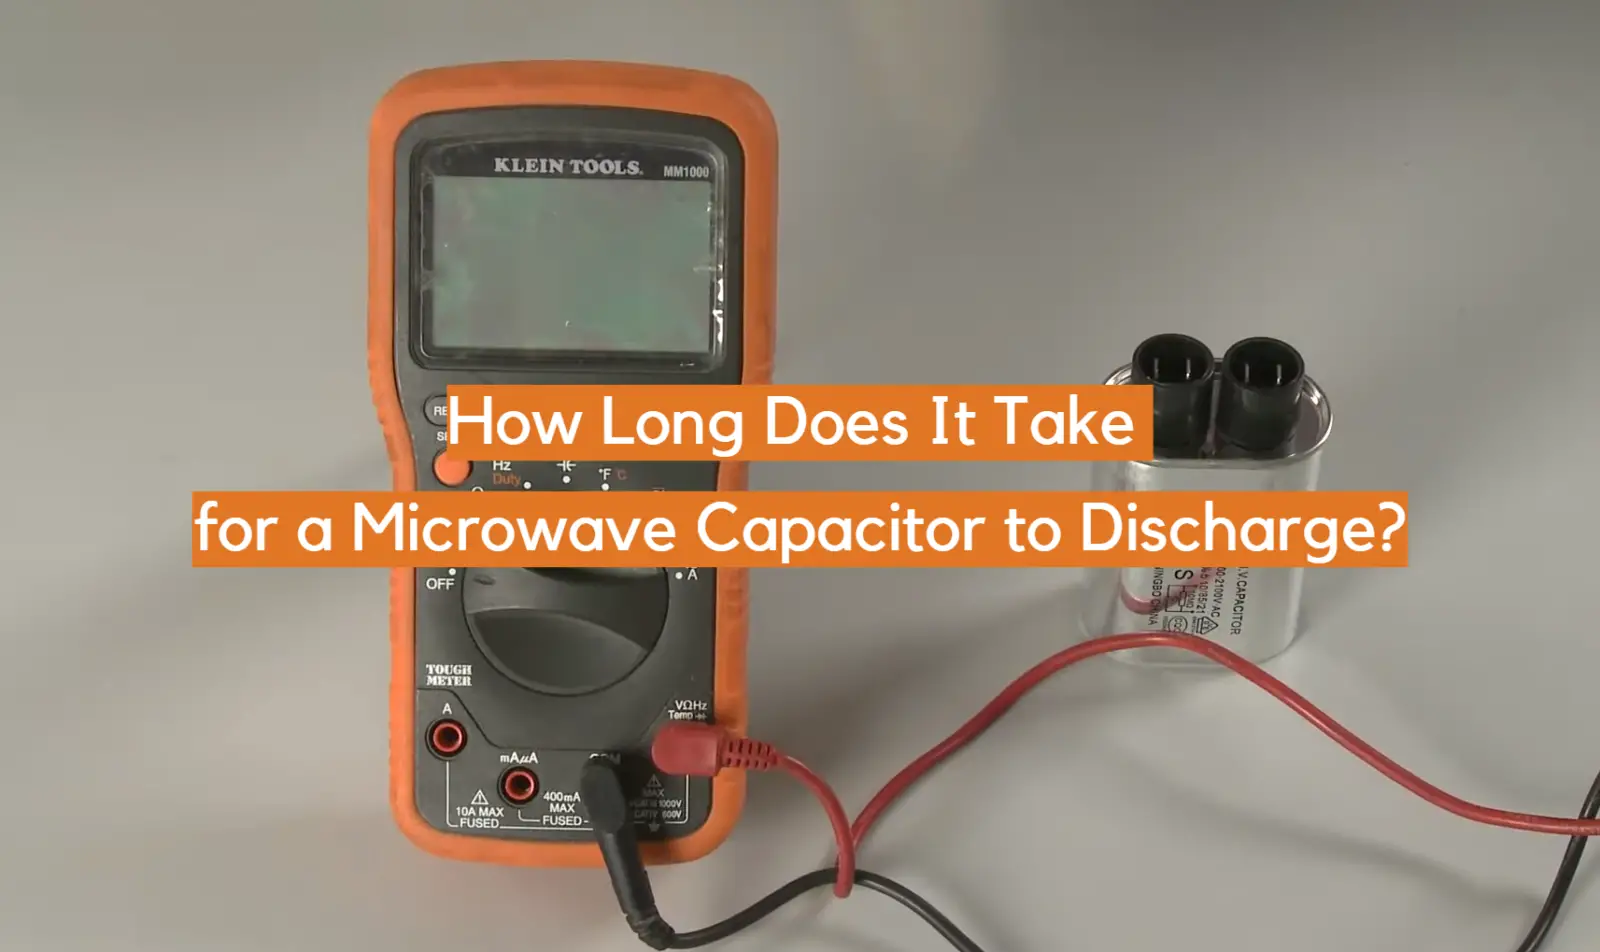 How Long Does It Take for a Microwave Capacitor to Discharge?